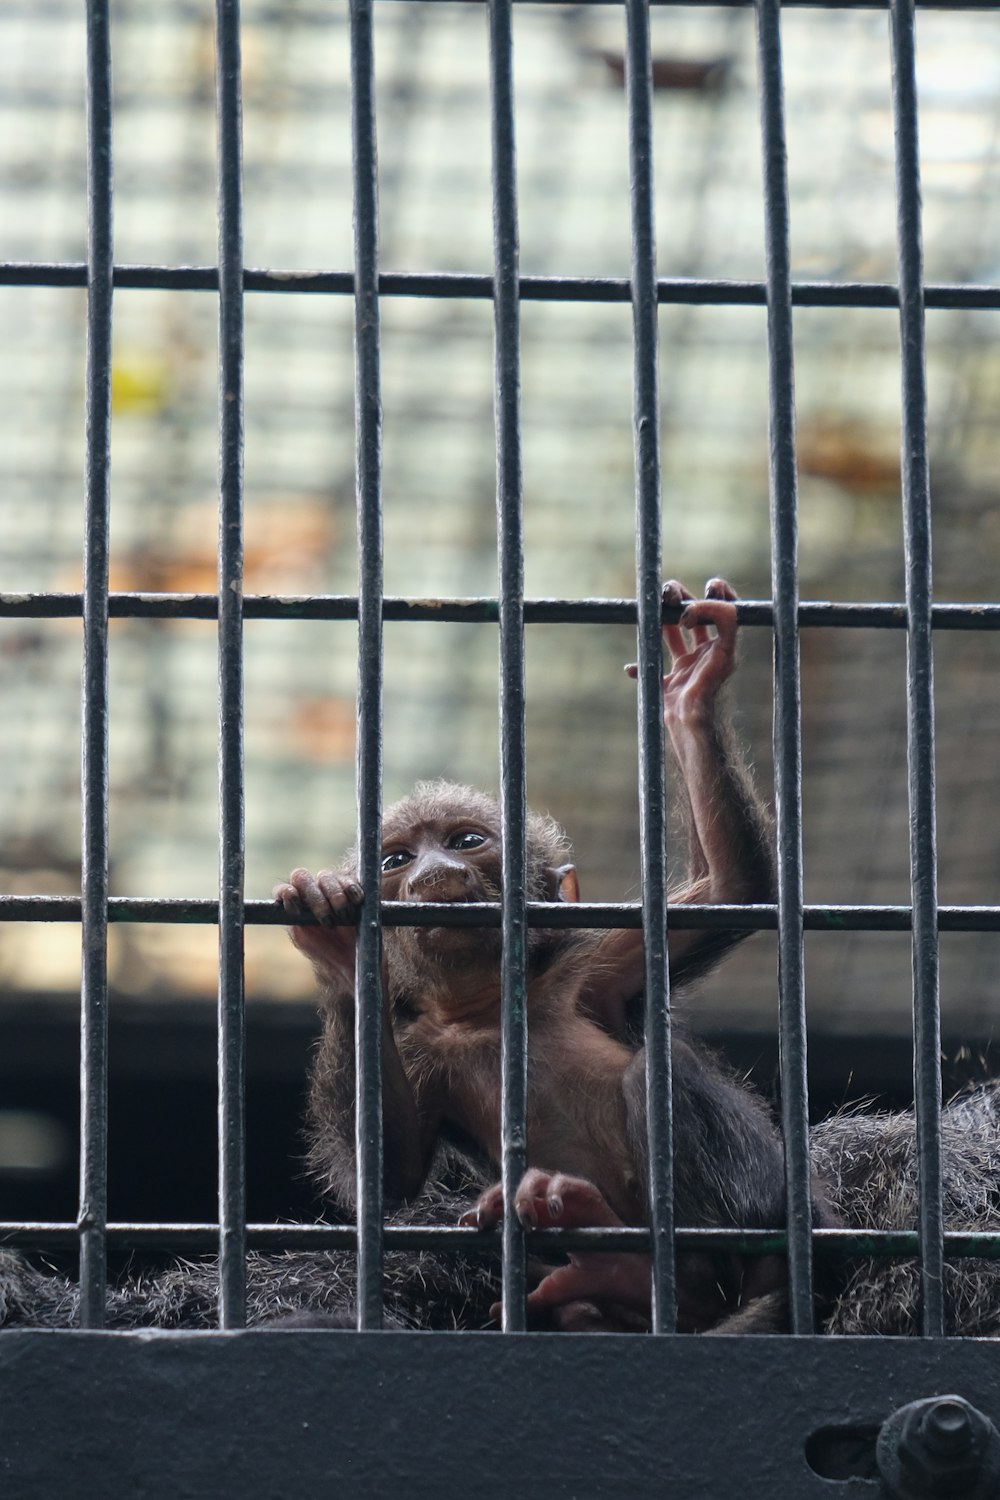 monkey in cage during daytime